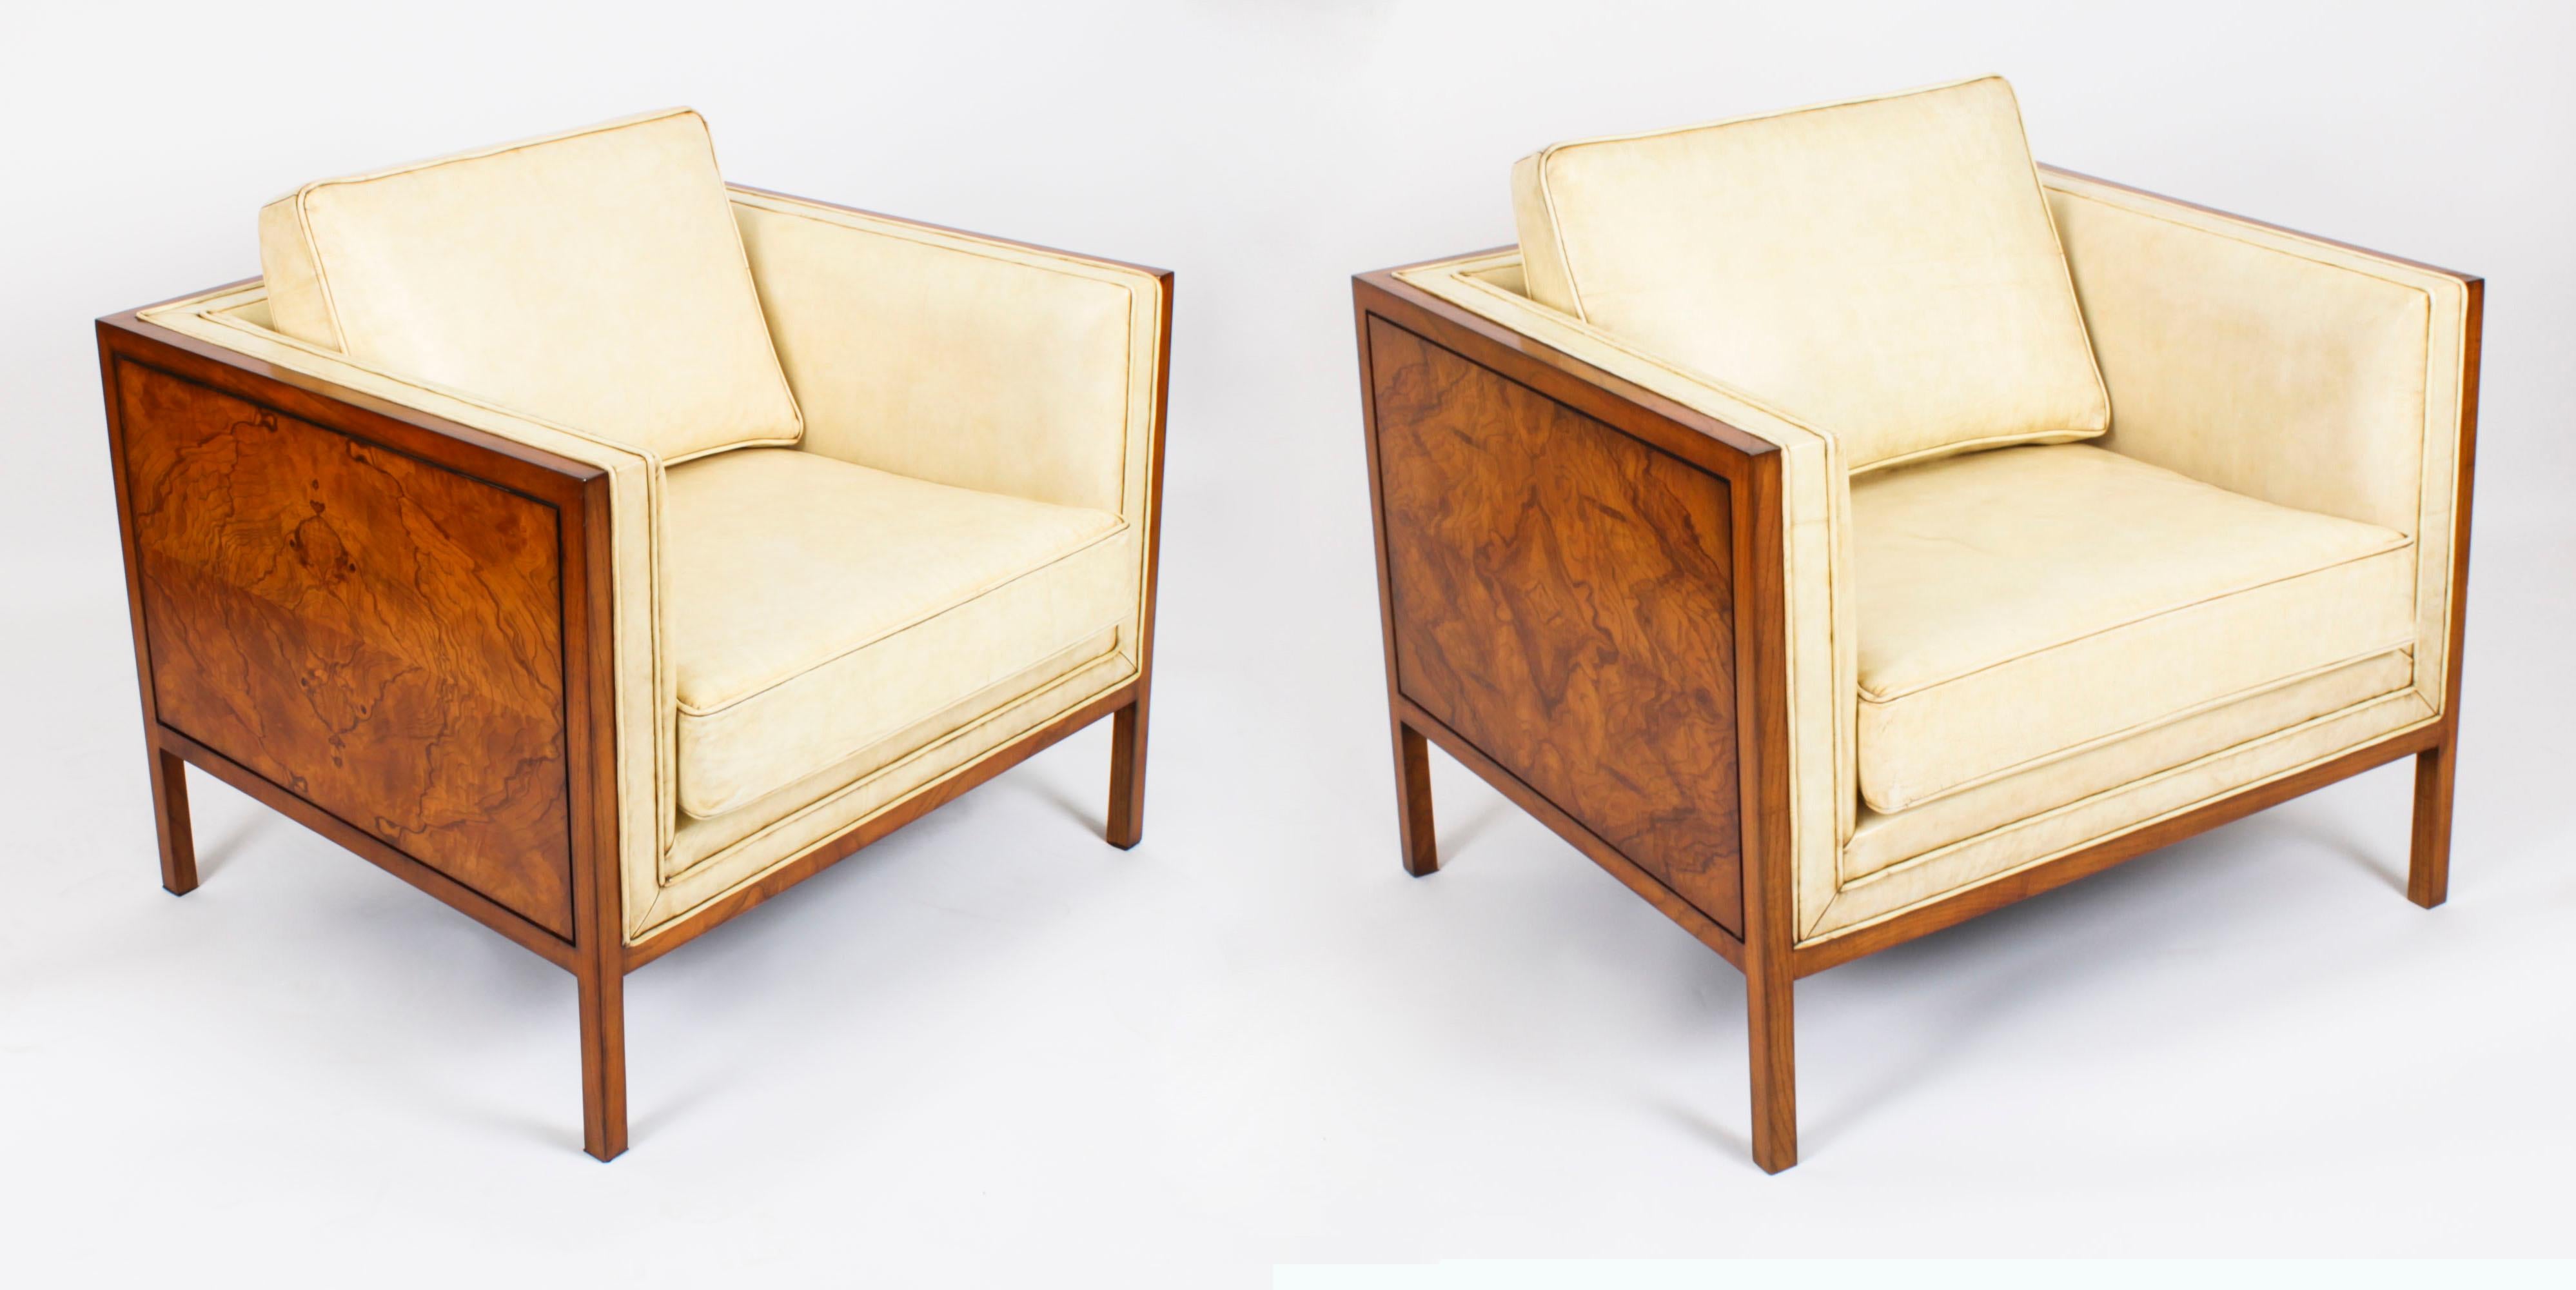 This is a stylish antique pair of Art Deco armchairs in burr walnut and walnut that have been upholstered in a luxurious cream leather with cream leather piping, circa 1920 in date

This very comfortable pair of armchairs feature decorative burr